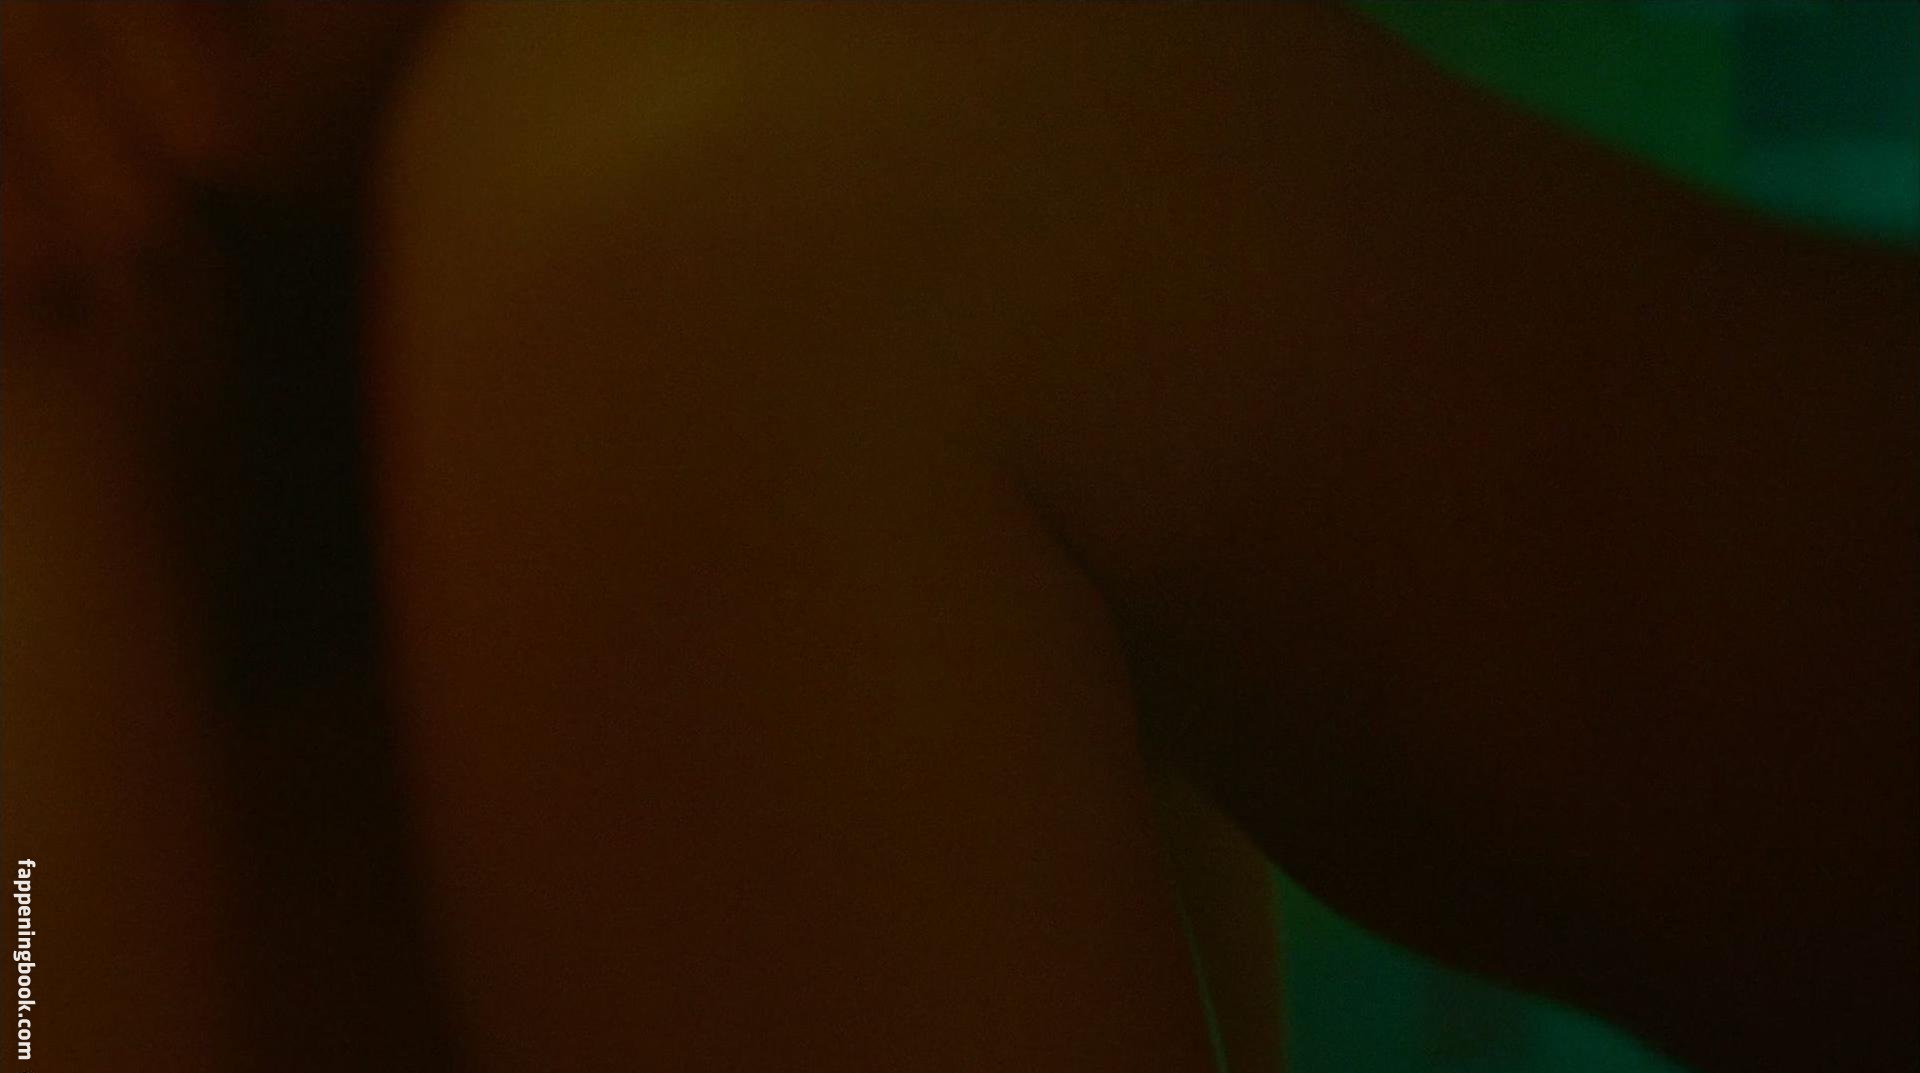 Aubrey Plaza Nude, The Fappening - Photo #58562 - FappeningBook.